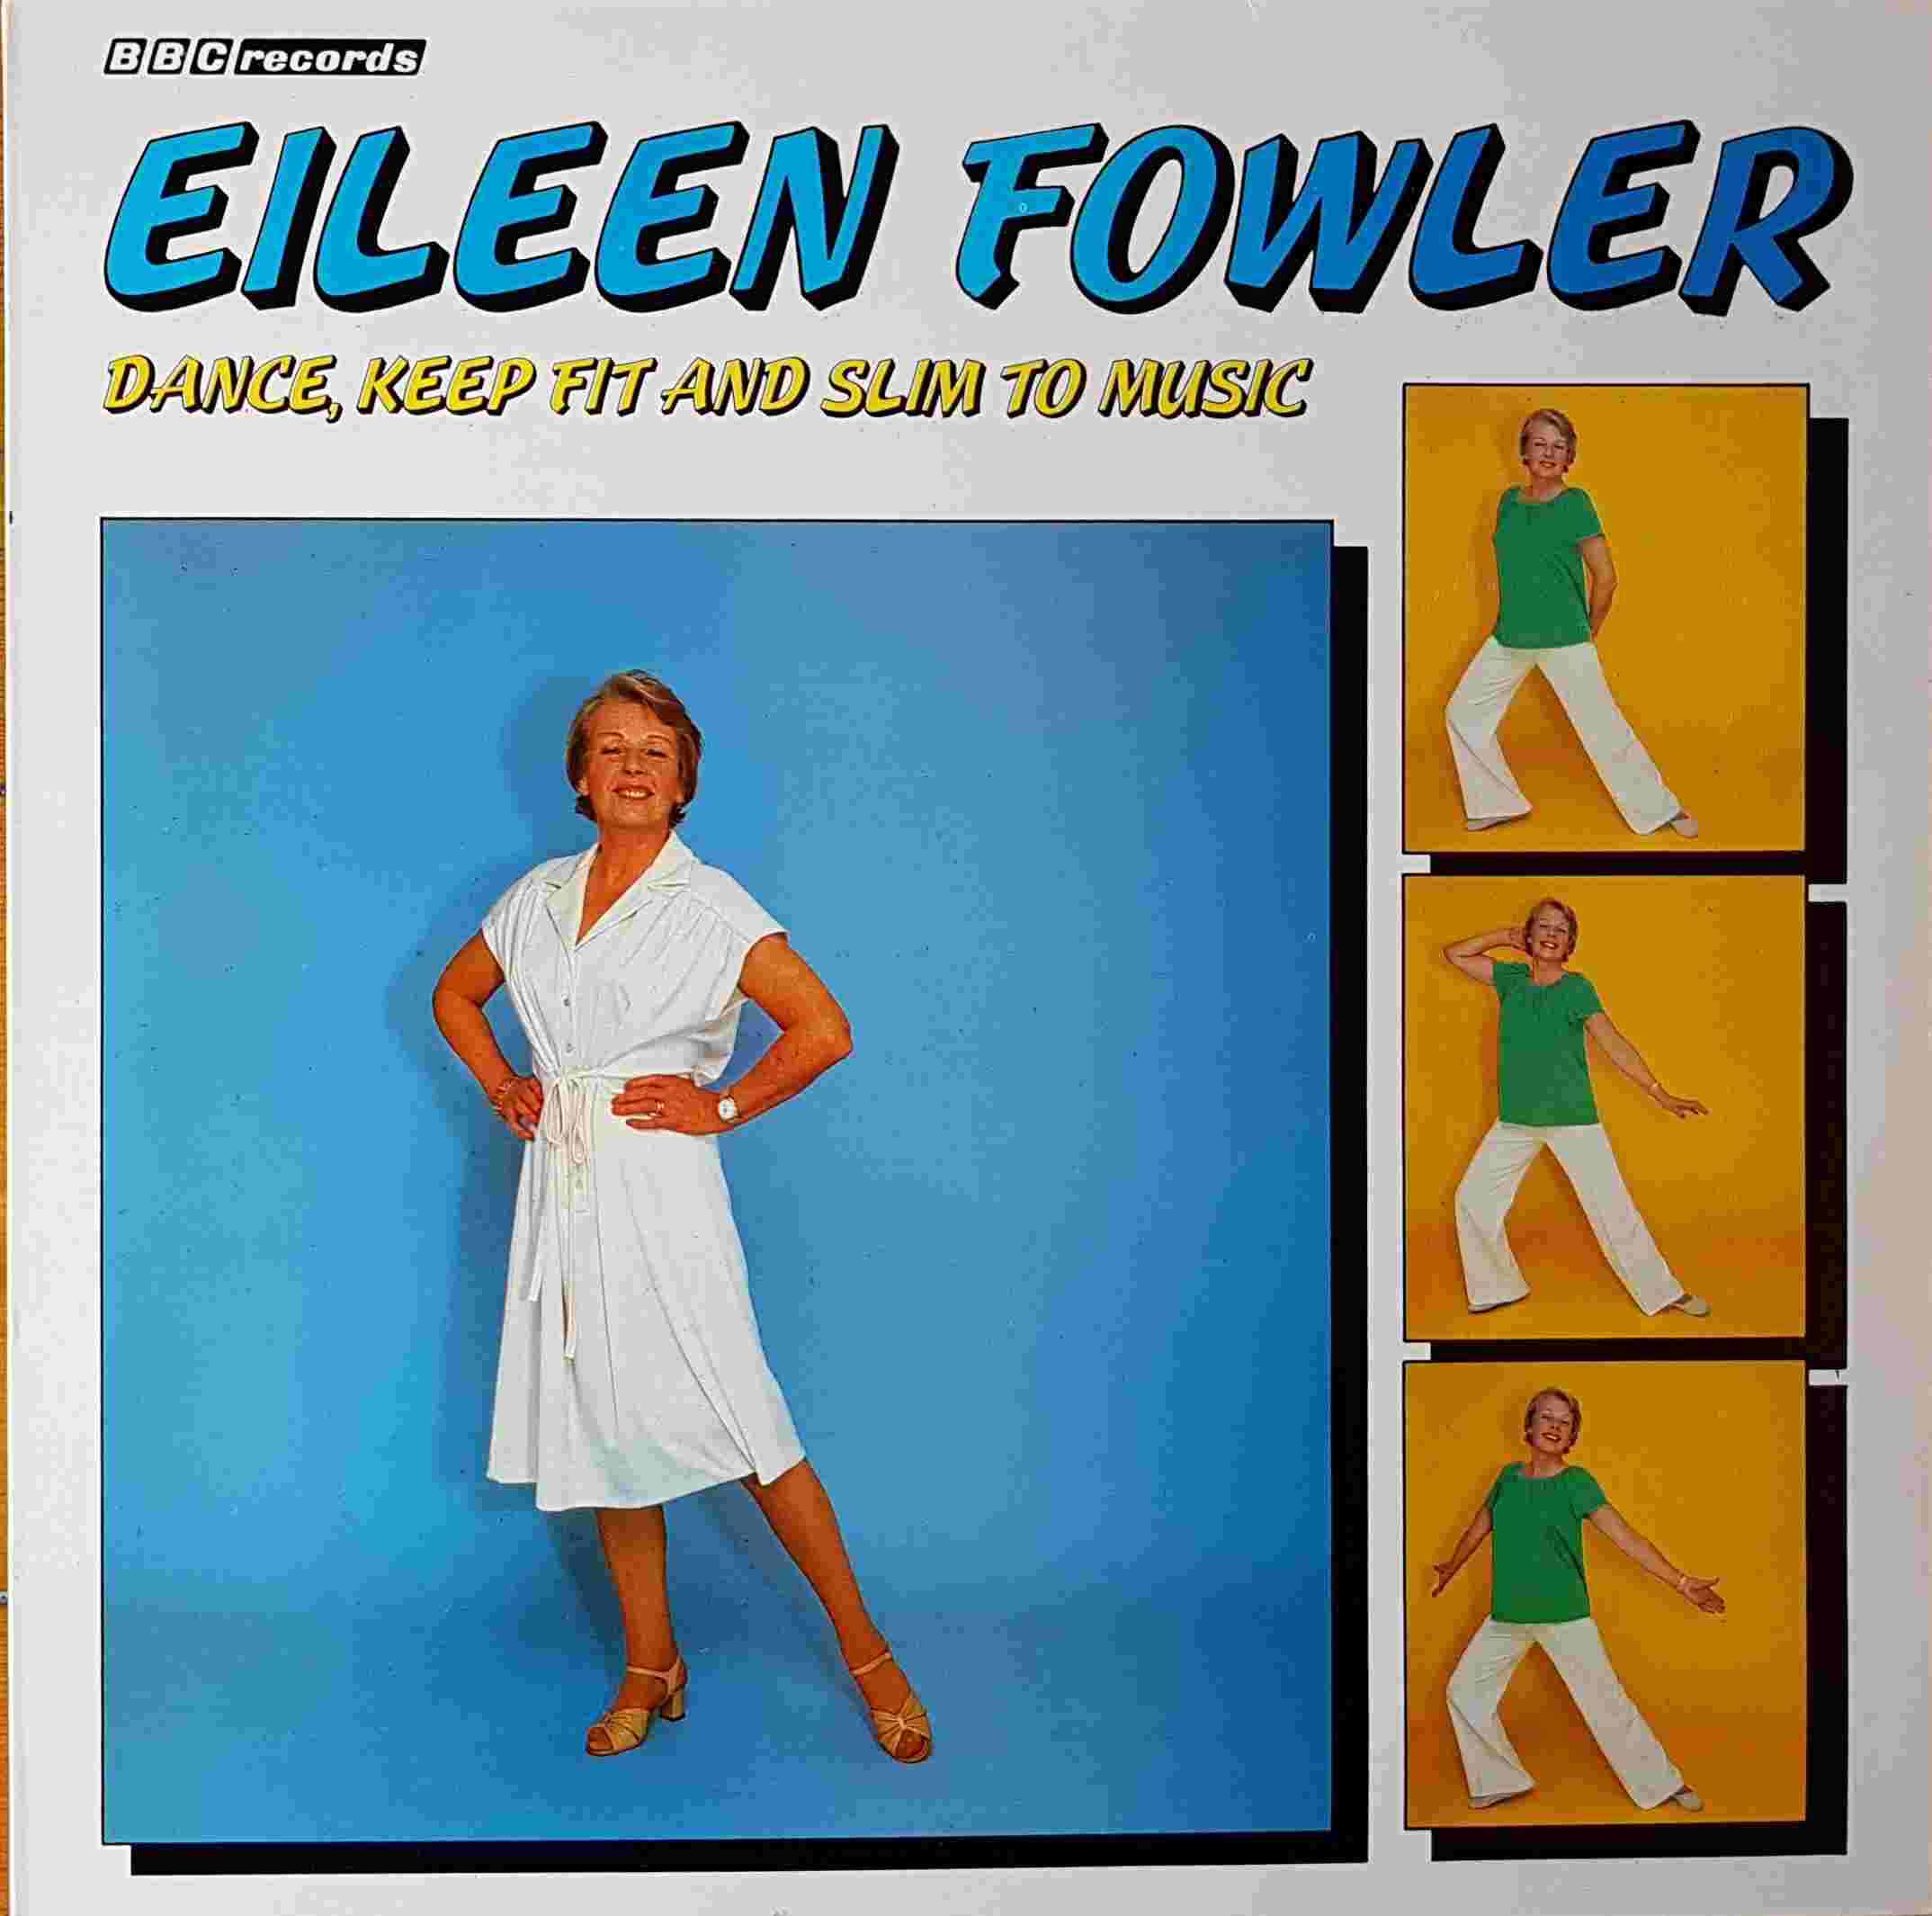 Picture of REC 382 Dance, keep fit and slim to music by artist Various / Eileen Fowler from the BBC albums - Records and Tapes library